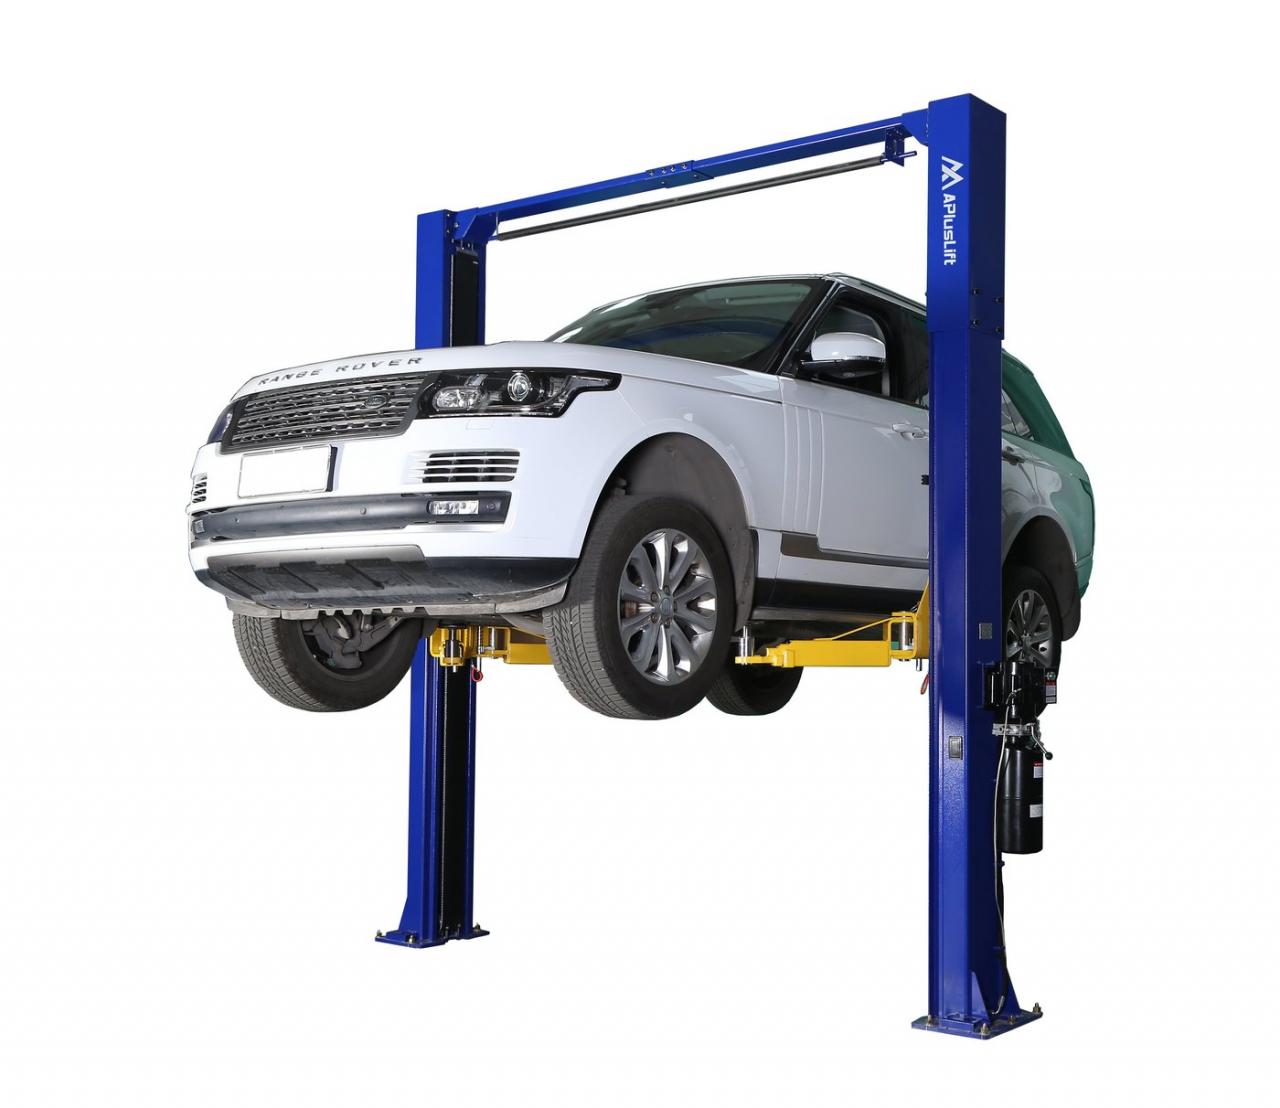 Buy APlusLift HW-10KOH 10,000LB Two Post Overhead Auto Hoist Clear Floor Car  Lift with Combo (Symmetric and Asymmetric) Arms Online in Hong Kong.  B07B7H5RL5